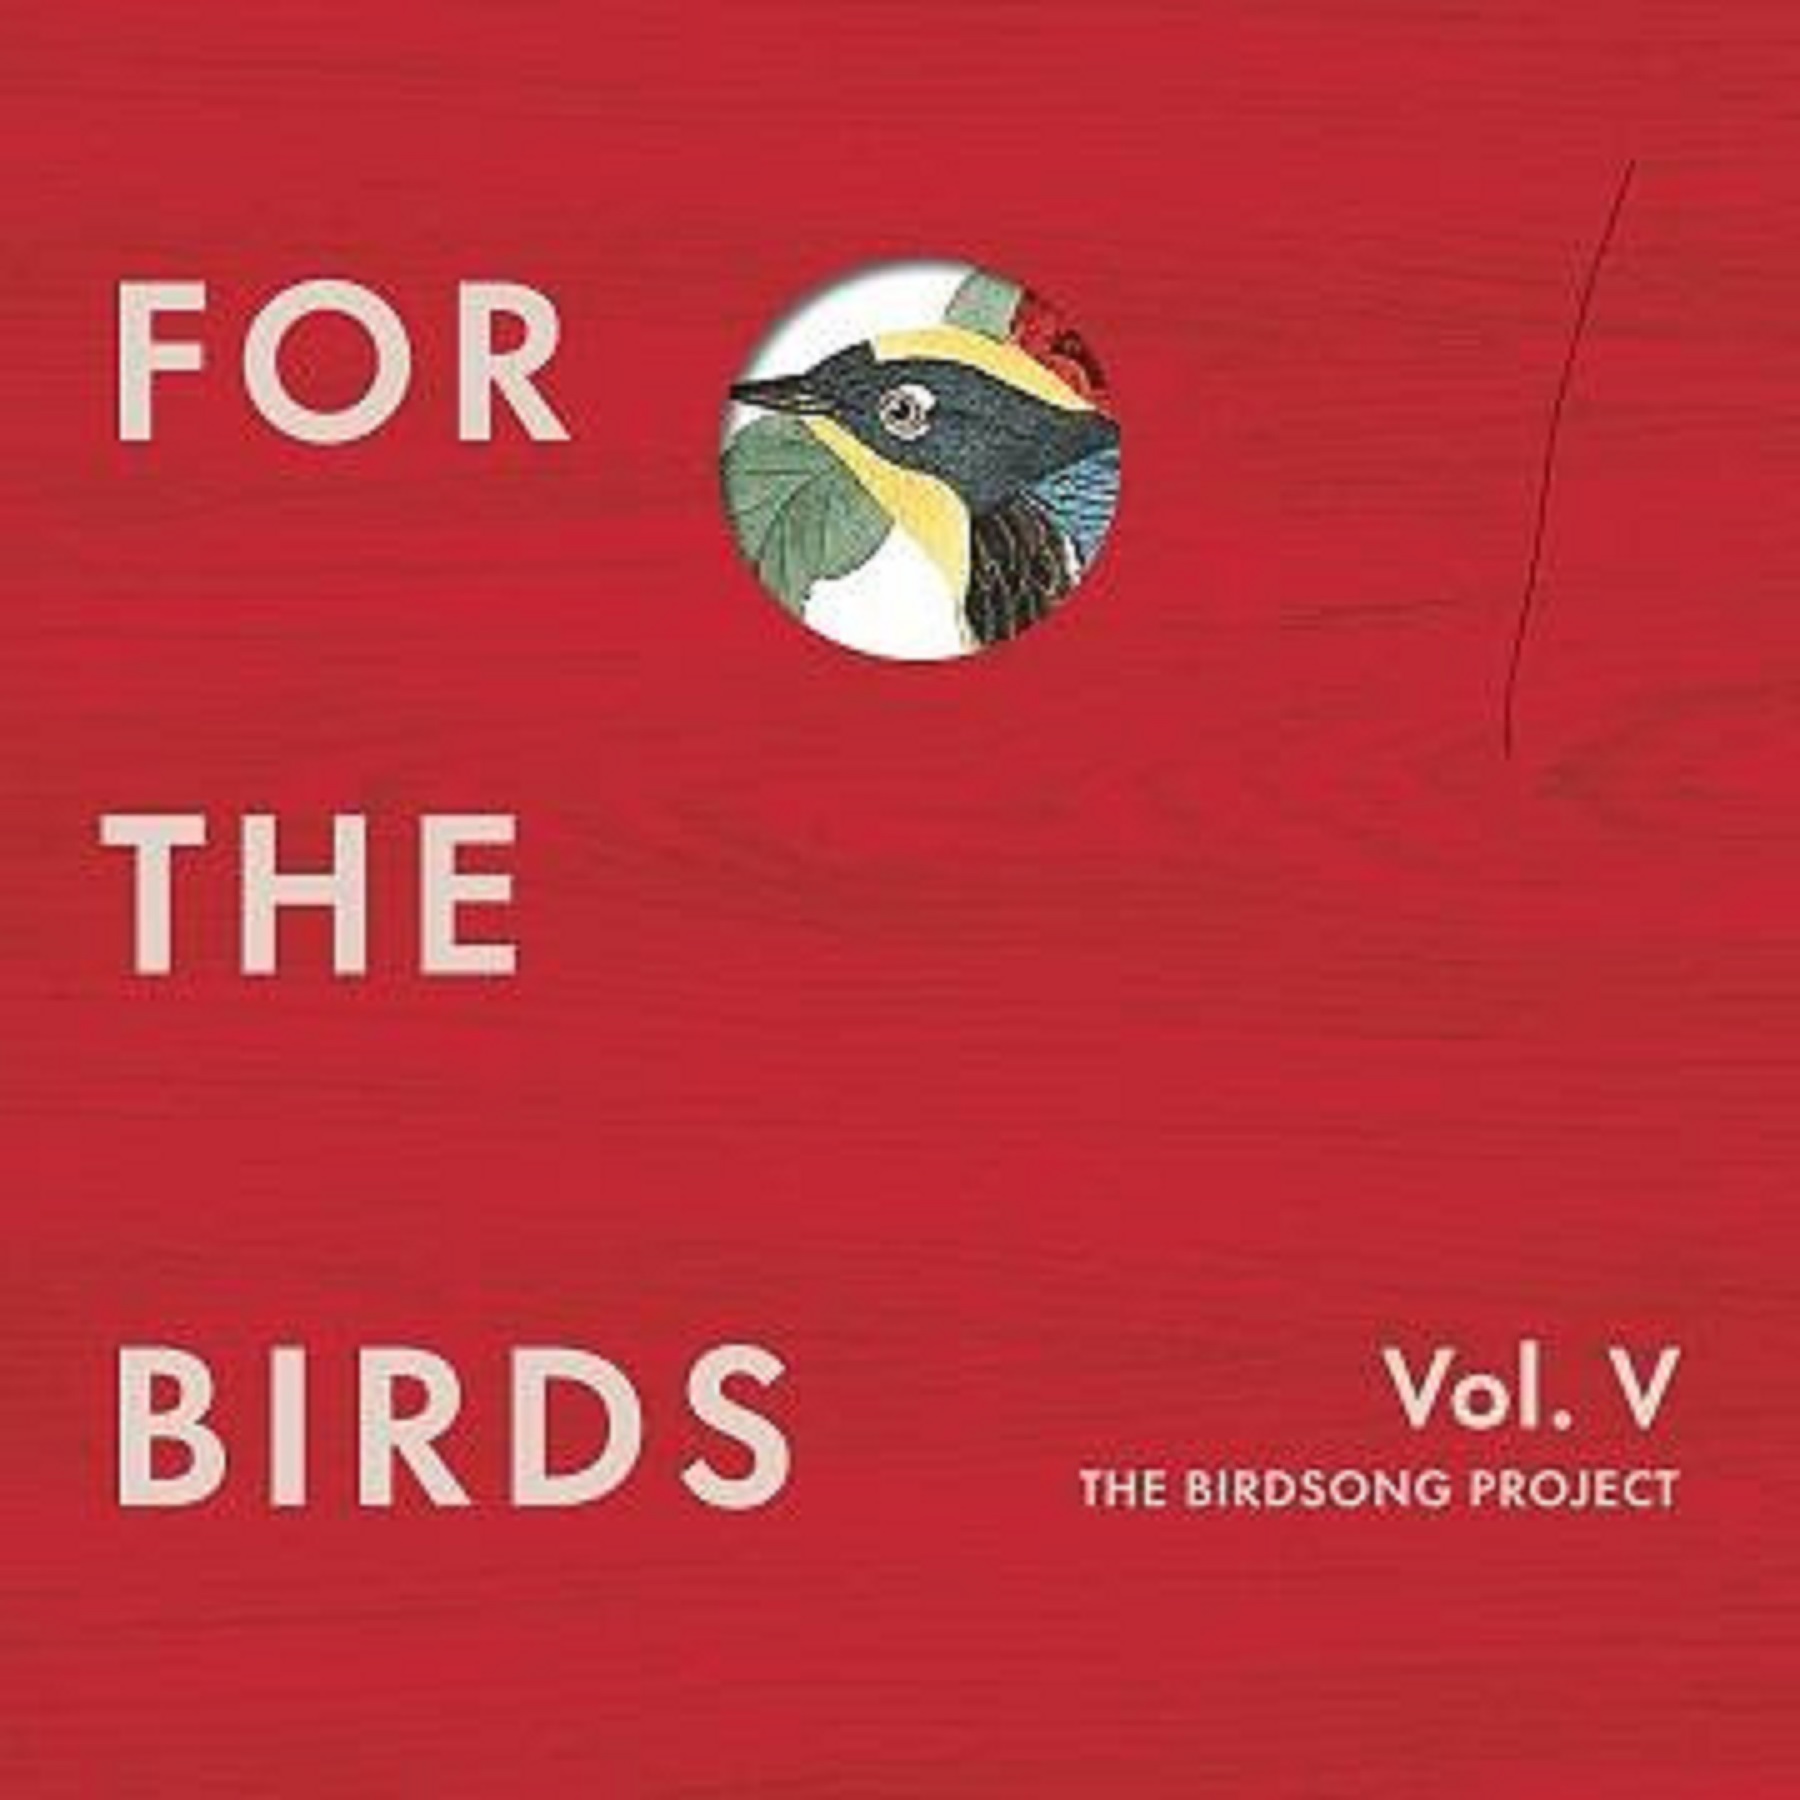 Final Vol of Birdsong Project out now feat. Yoko Ono, Bette Midler, Animal Collective and more